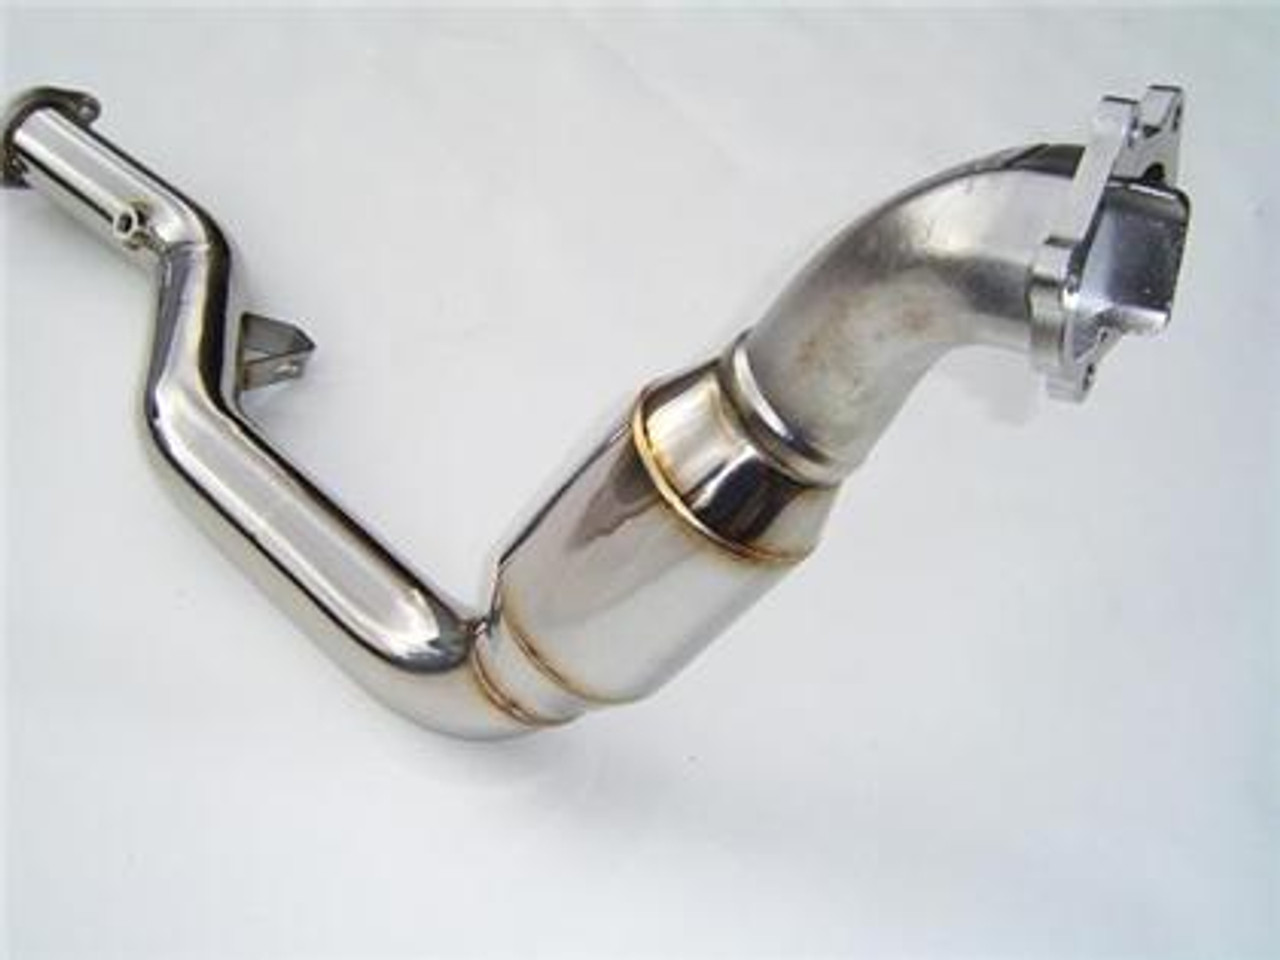 Invidia 05+ LGT (automatic transmission) Polished Divorced Waste Gate Downpipe with High Flow Cat